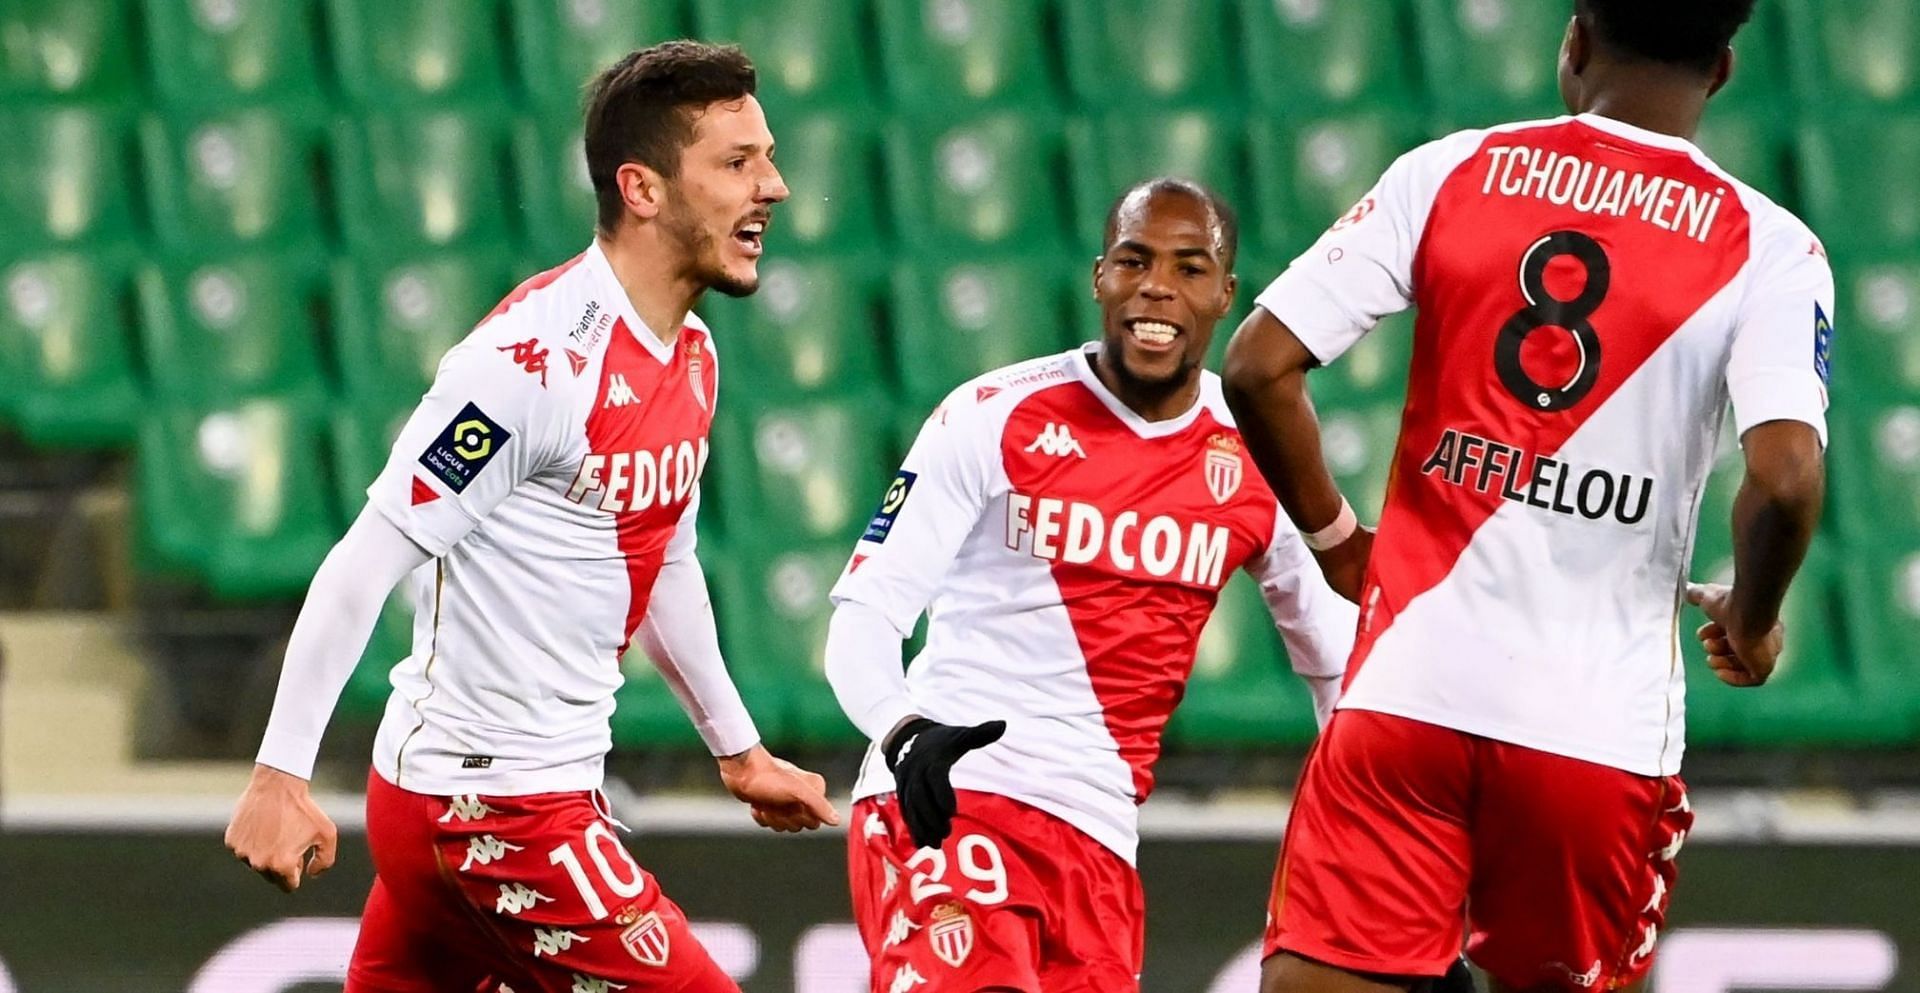 Monaco take on Red Star in the Coupe de France on Sunday